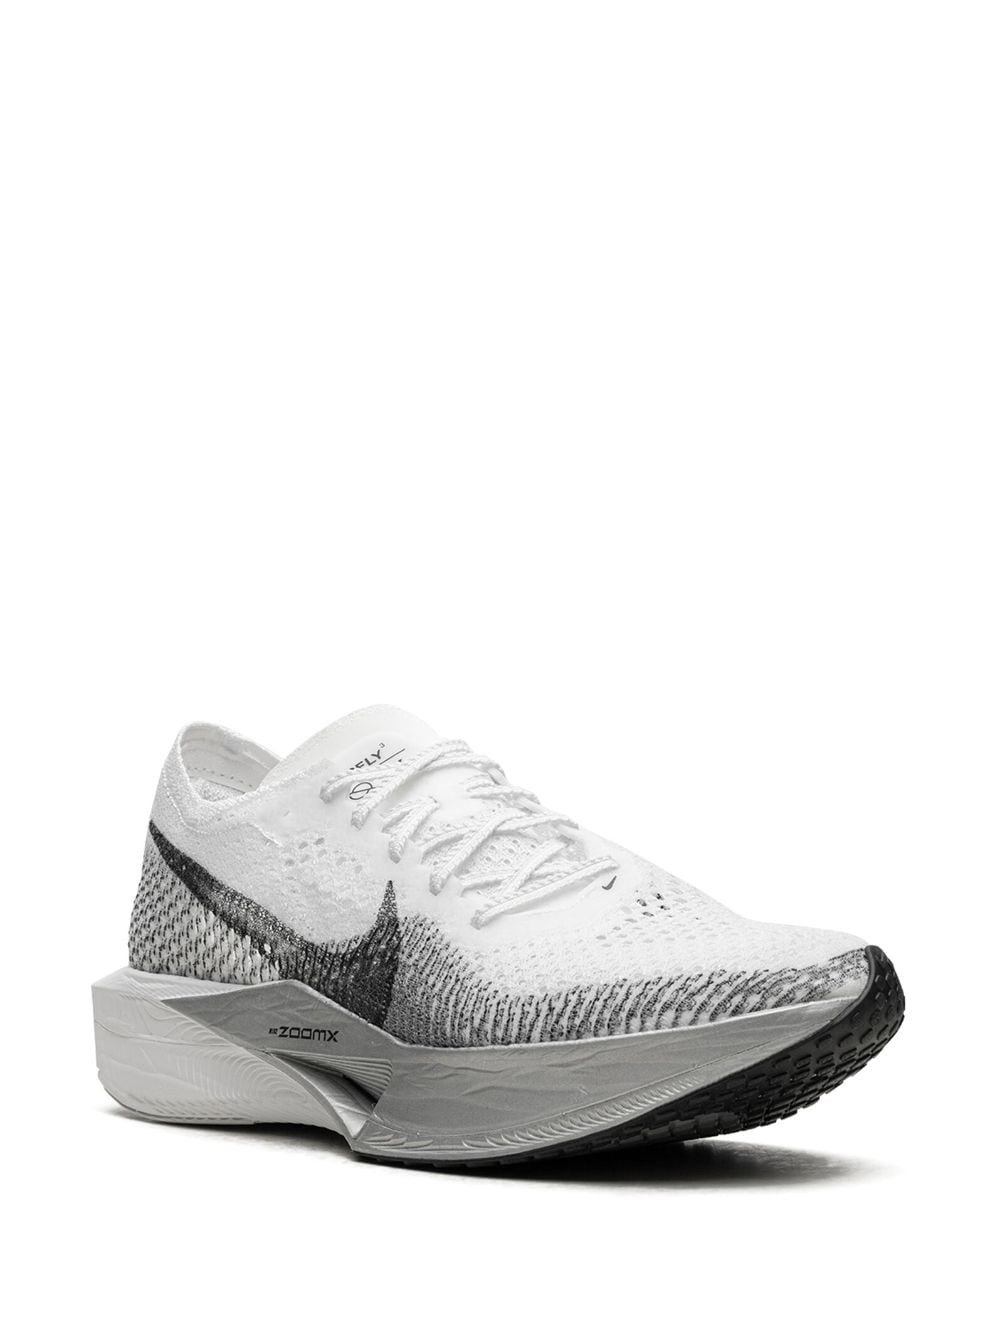 ZoomX Vaporfly 3 "White Particle Grey" sneakers - 2